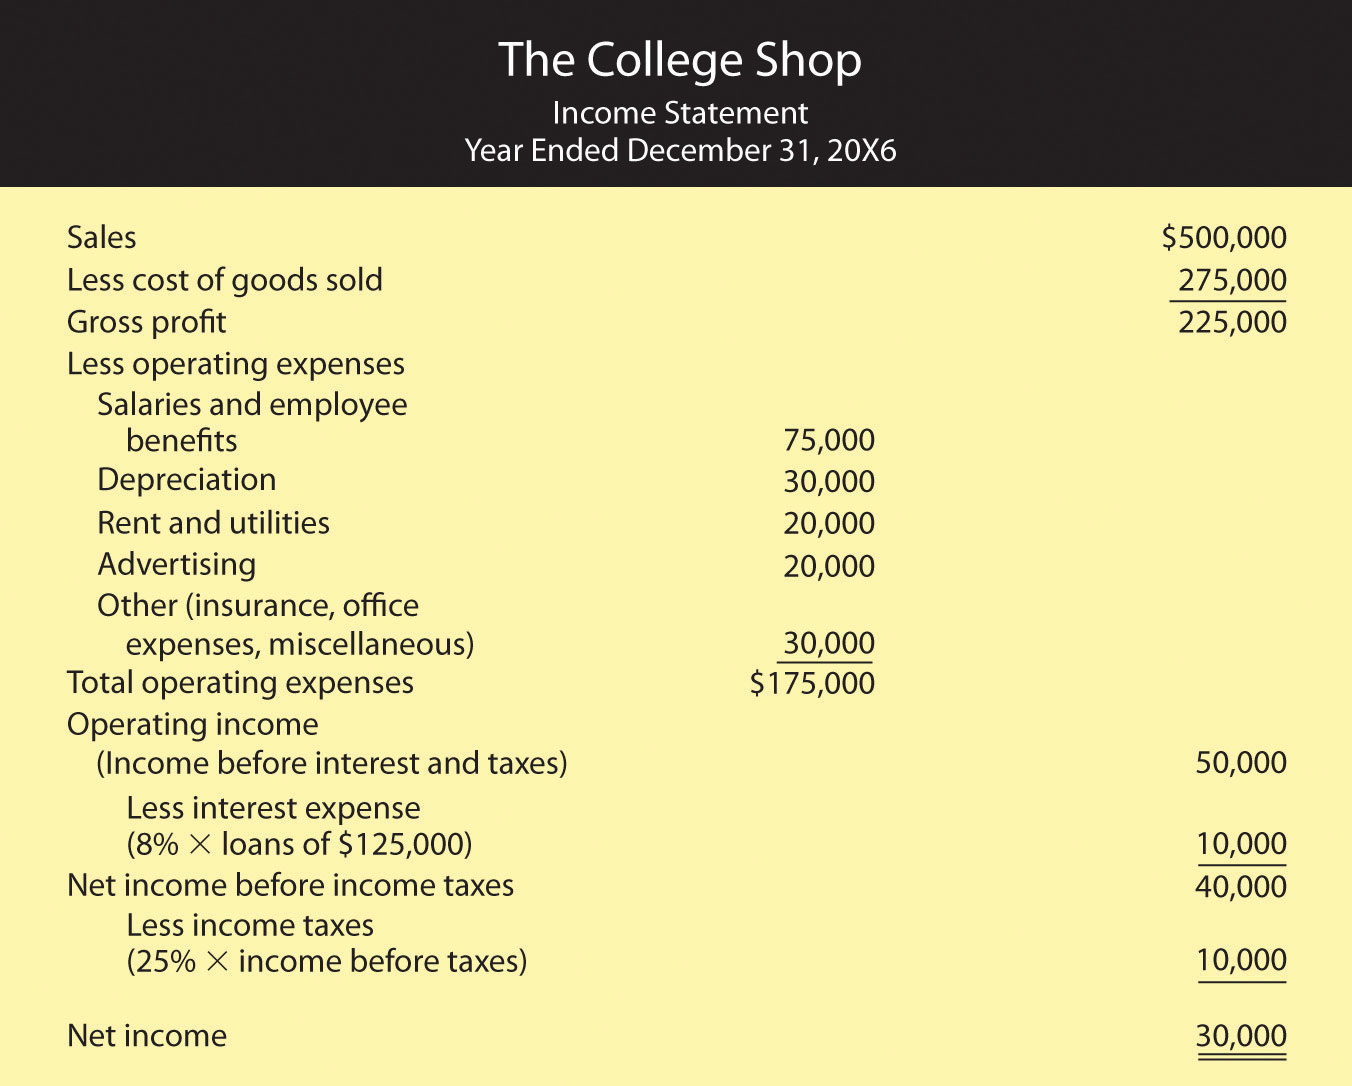 Income Statement for The College Shop, Year Ended December 31